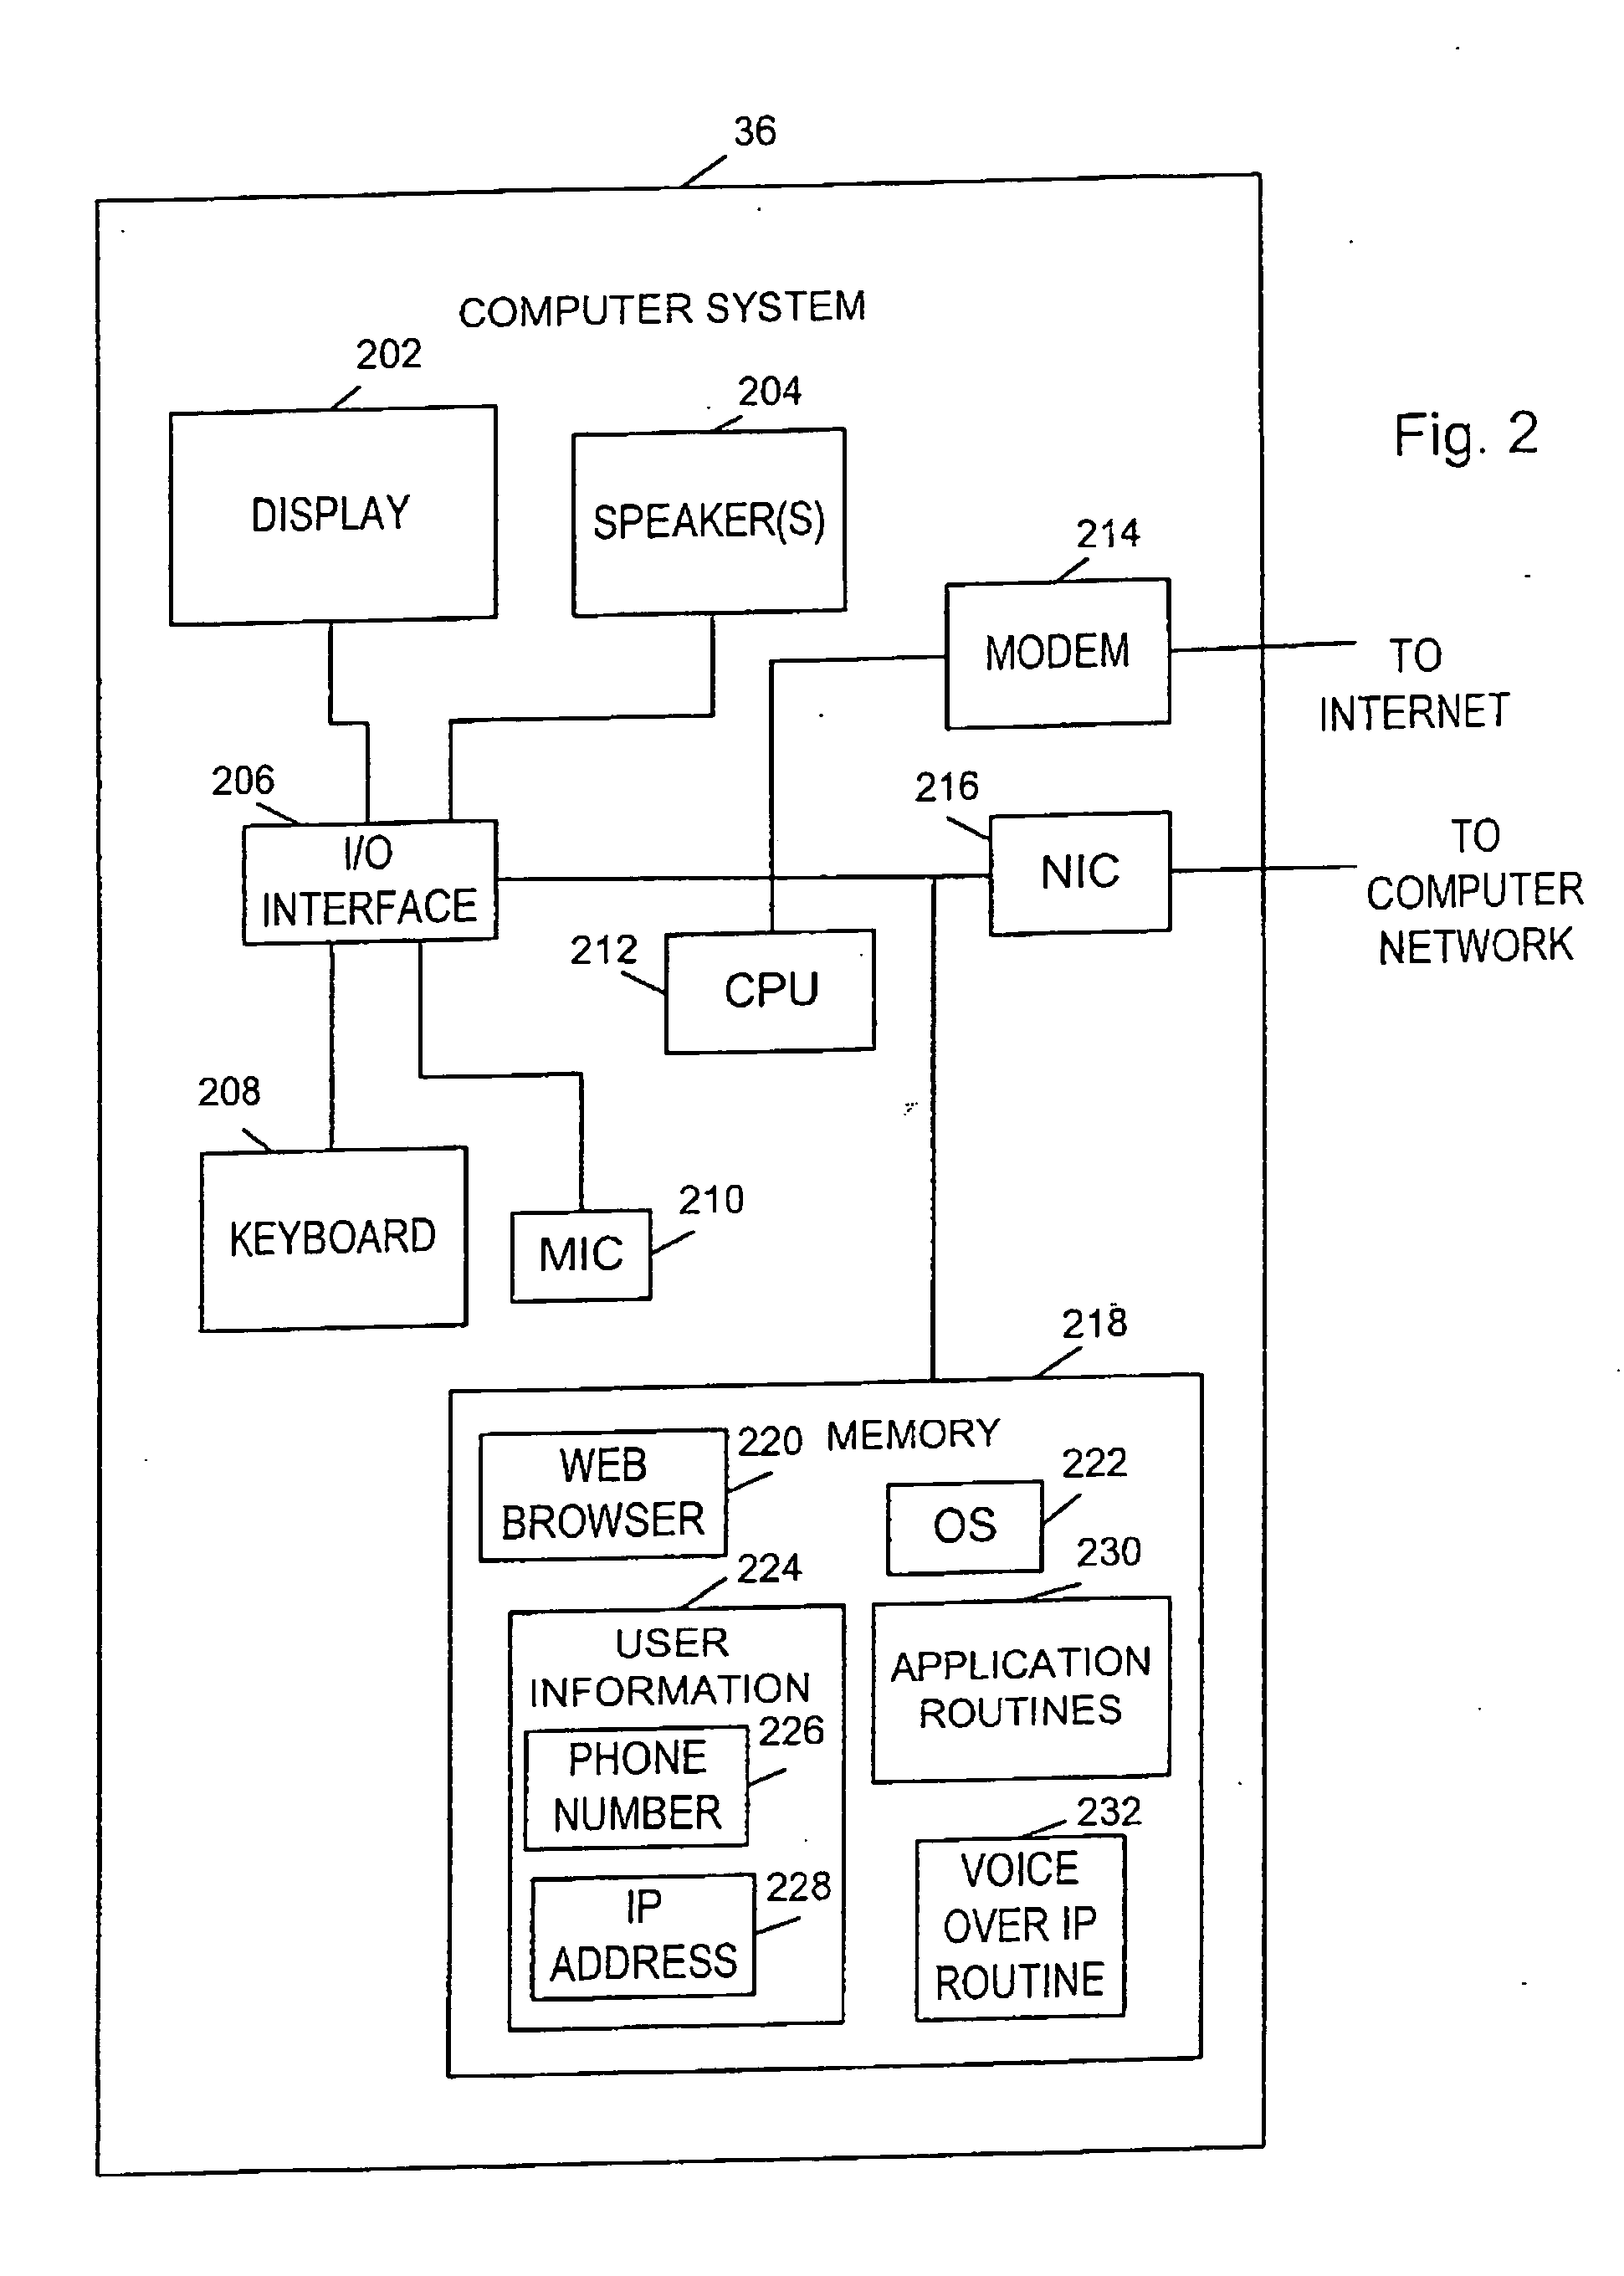 Methods and apparatus for providing telephone support for internet sales